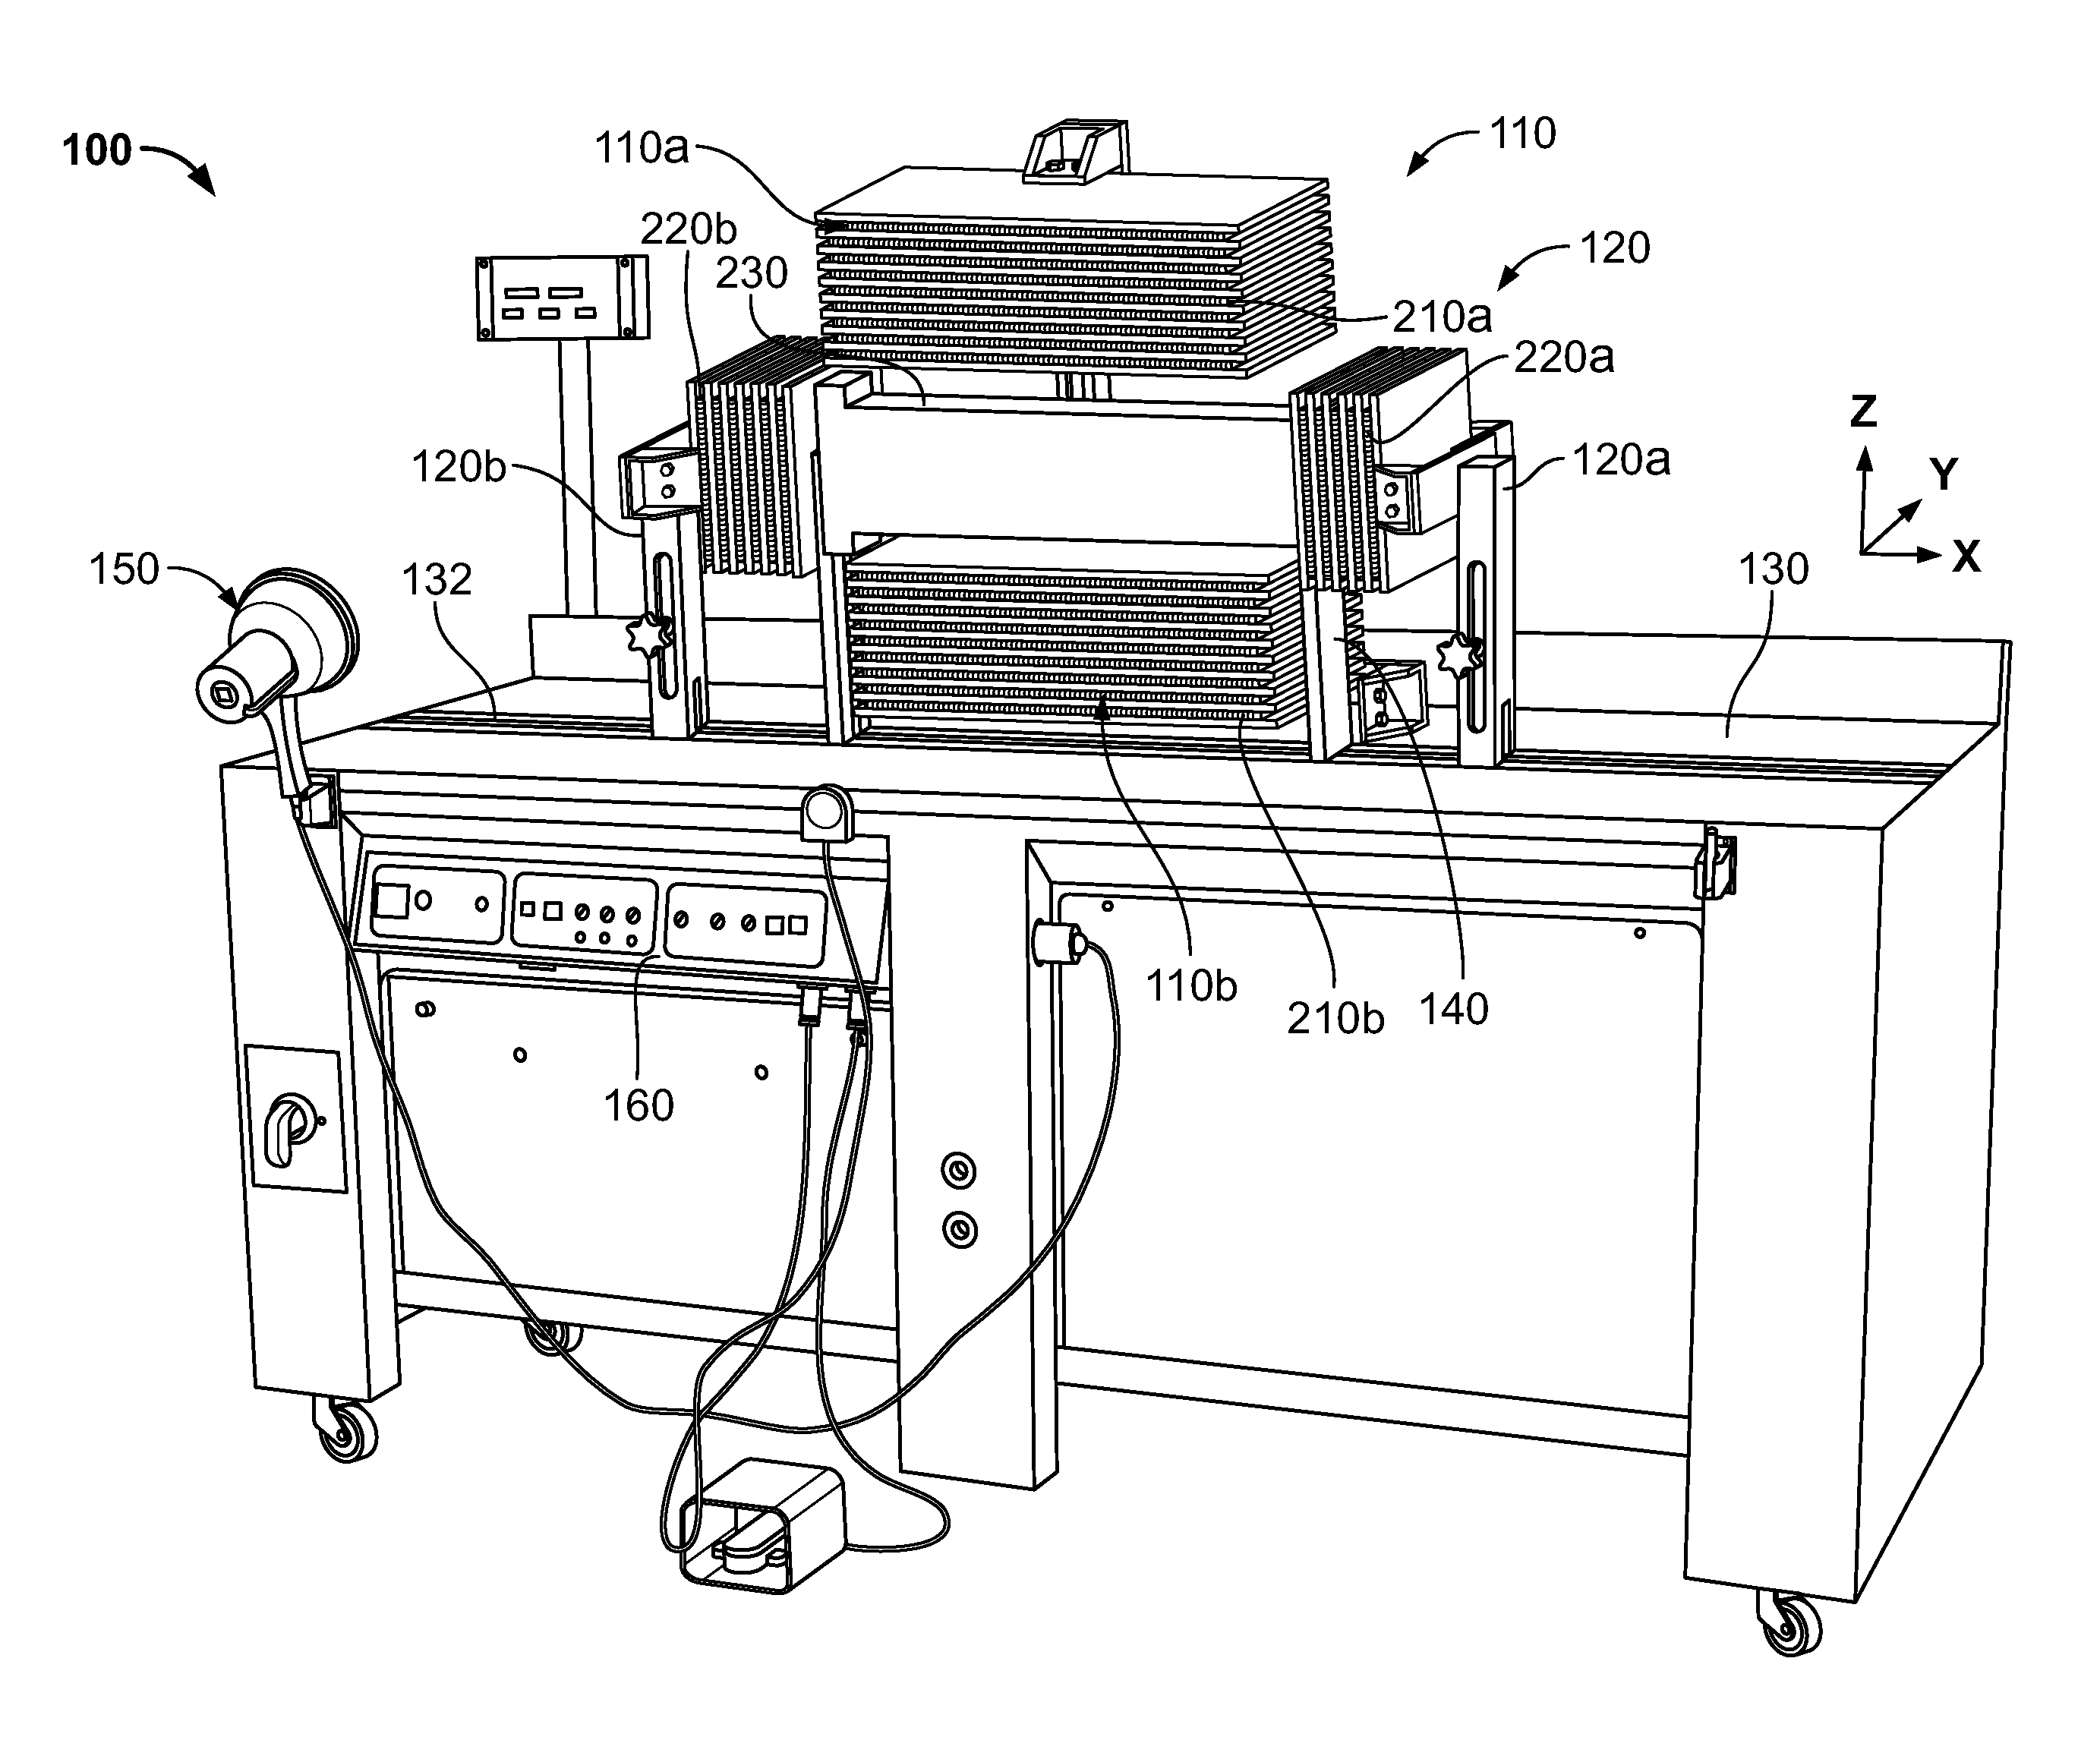 Magnetic particle inspection apparatus and method